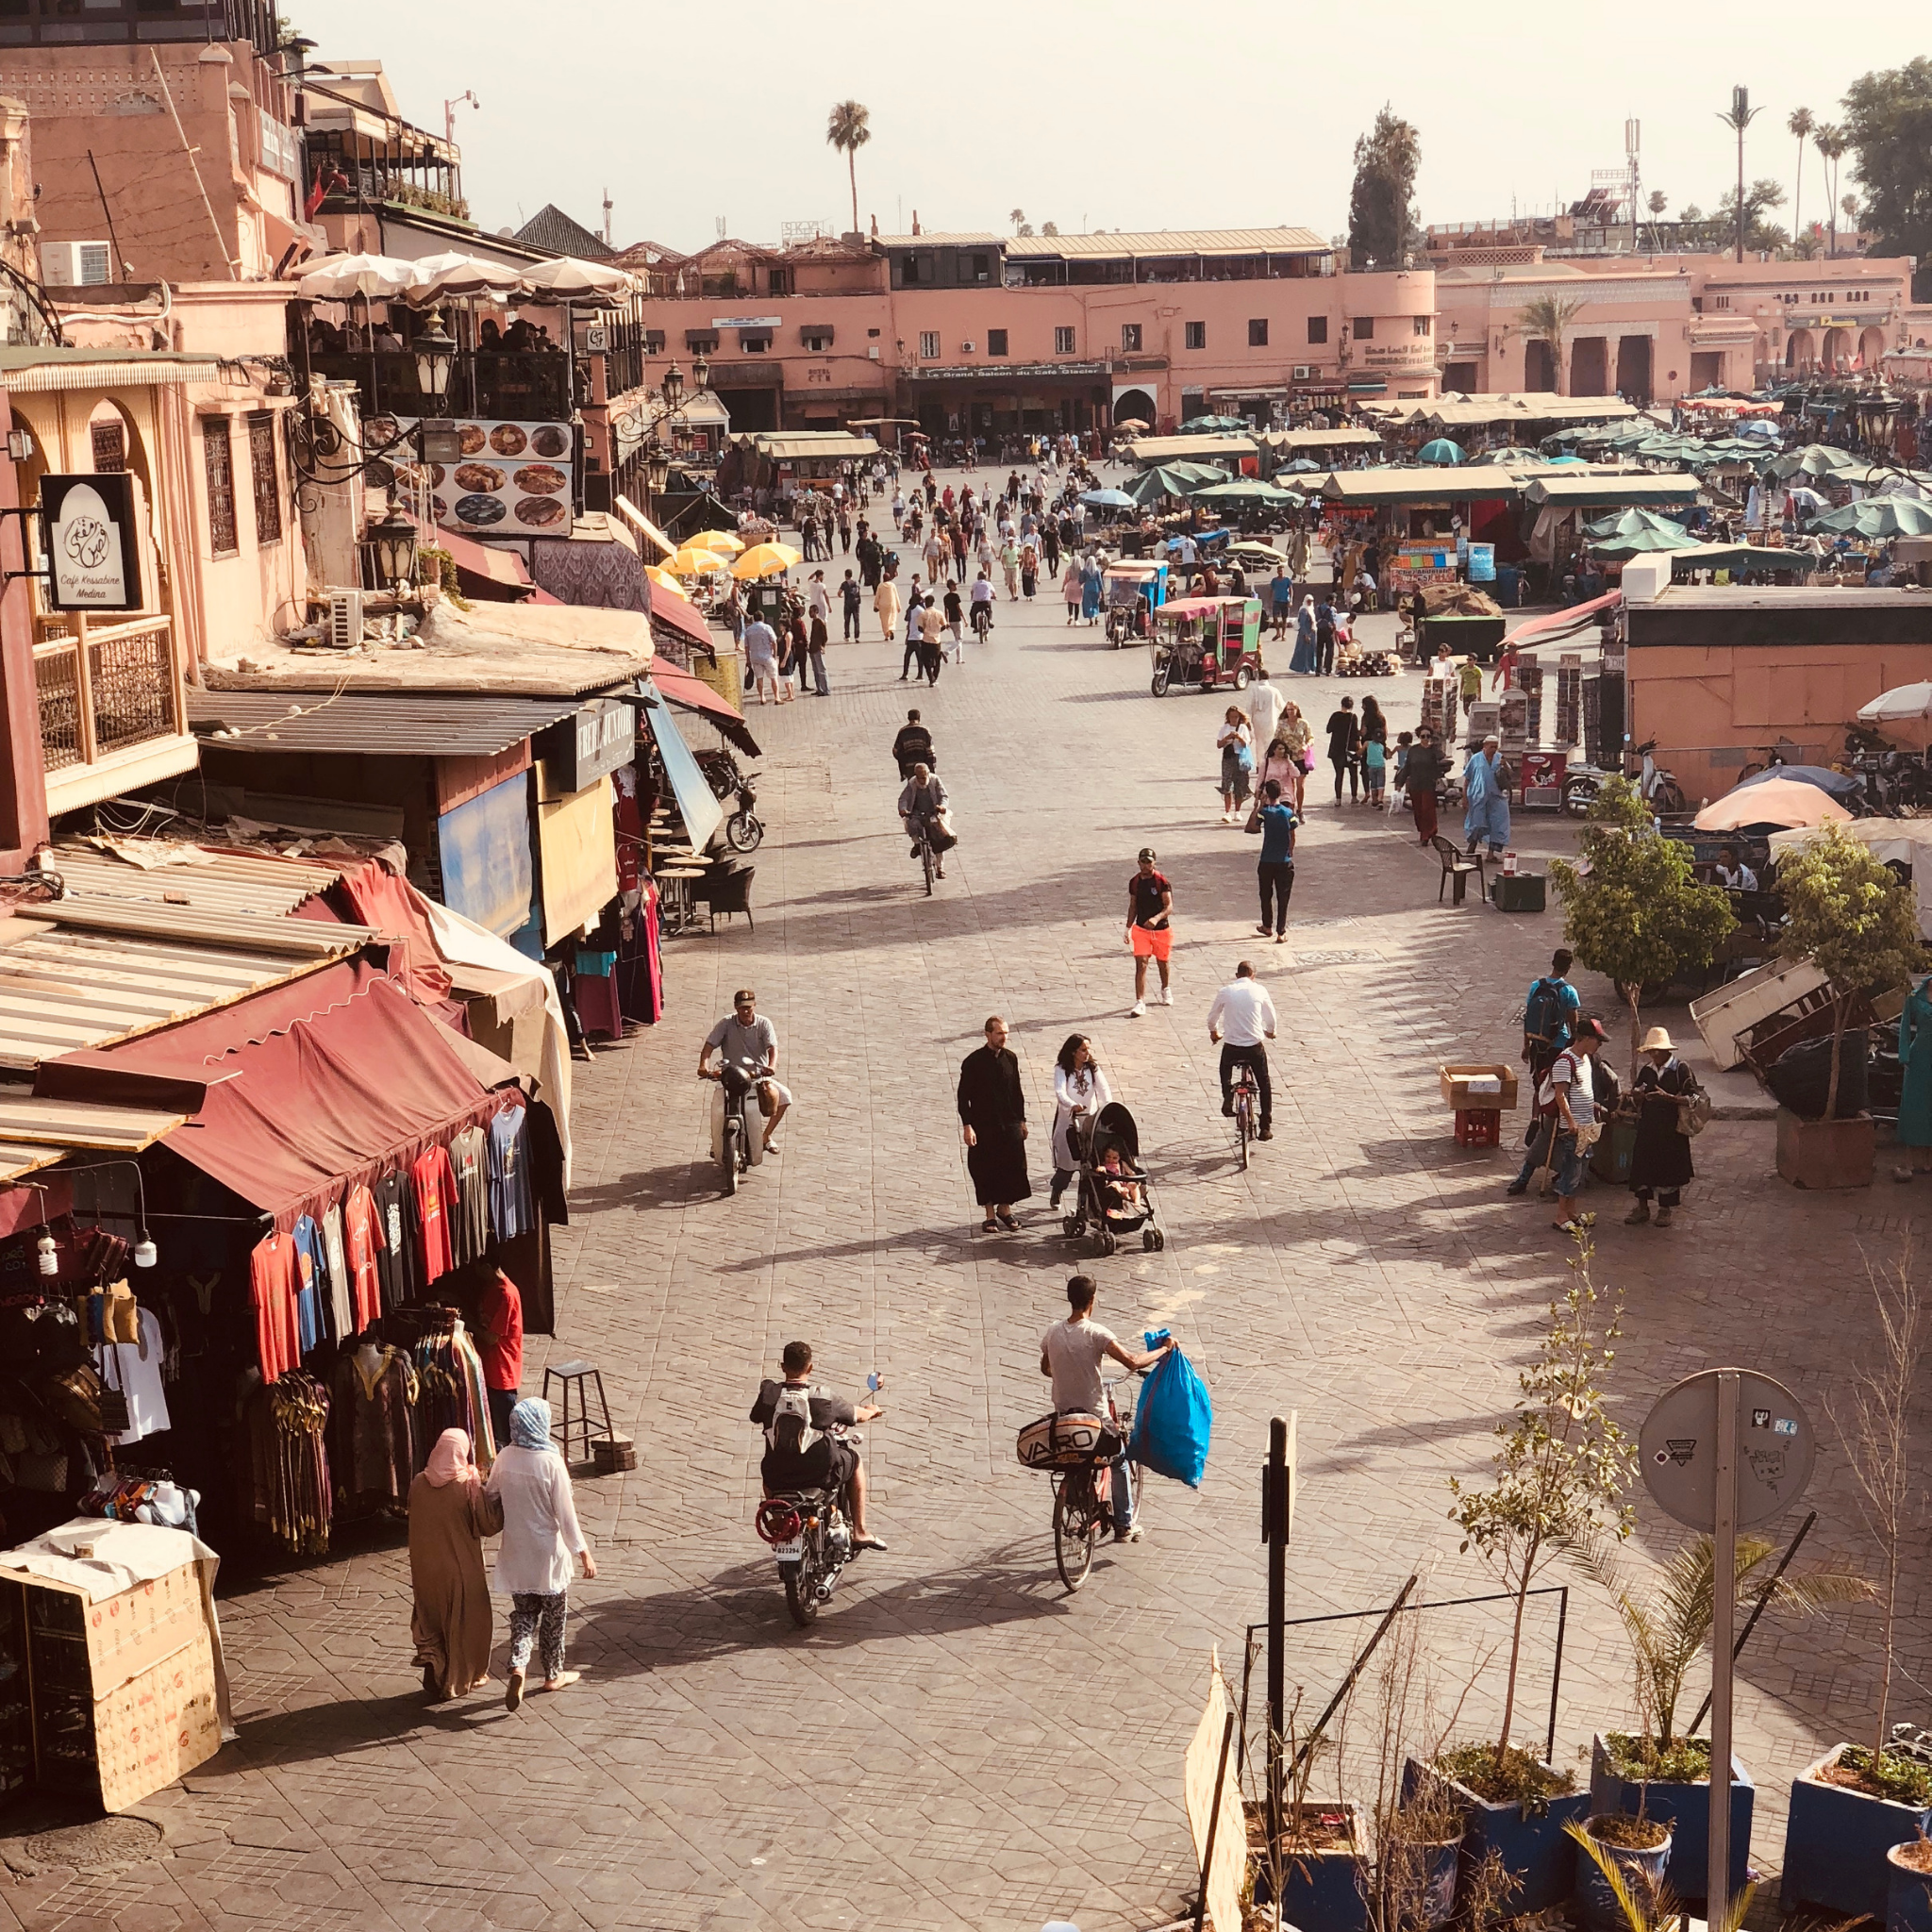 Jemaa el-Fnaa, Africa's largest open square in Marrakech Morocco